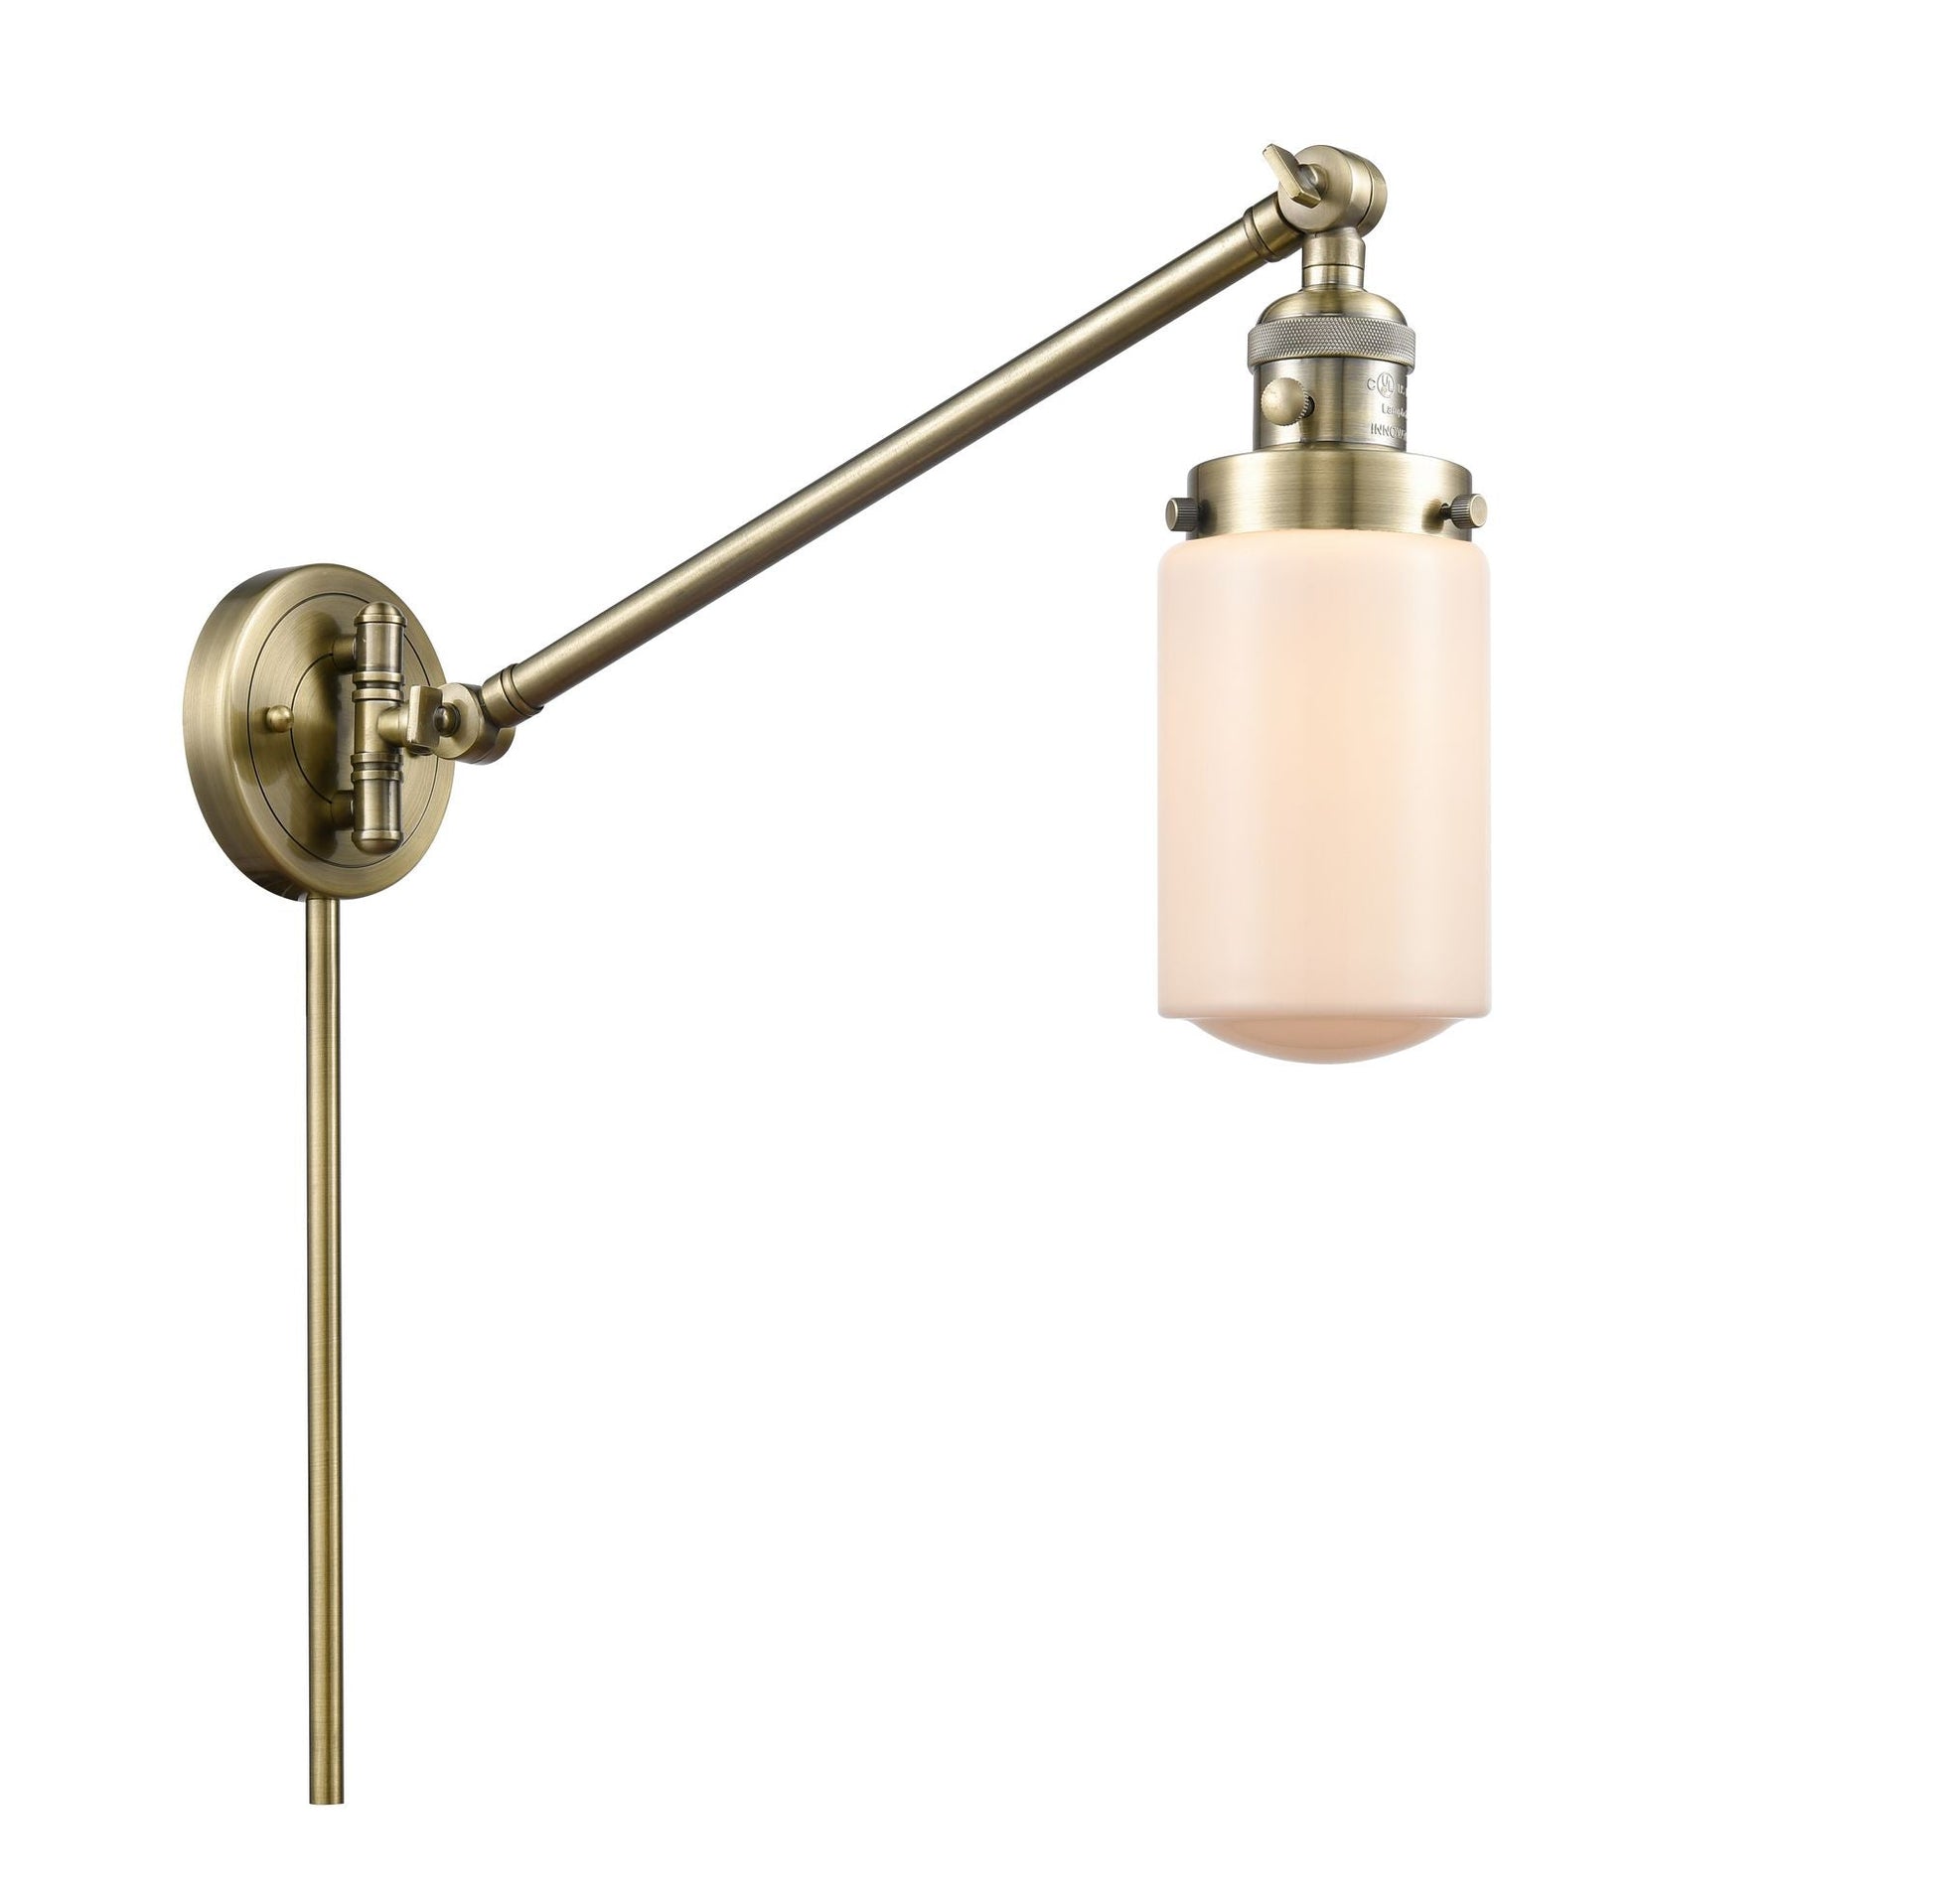 1-Light 4.5" Dover Swing Arm With Switch - Cylinder Matte White Glass - Choice of Finish And Incandesent Or LED Bulbs